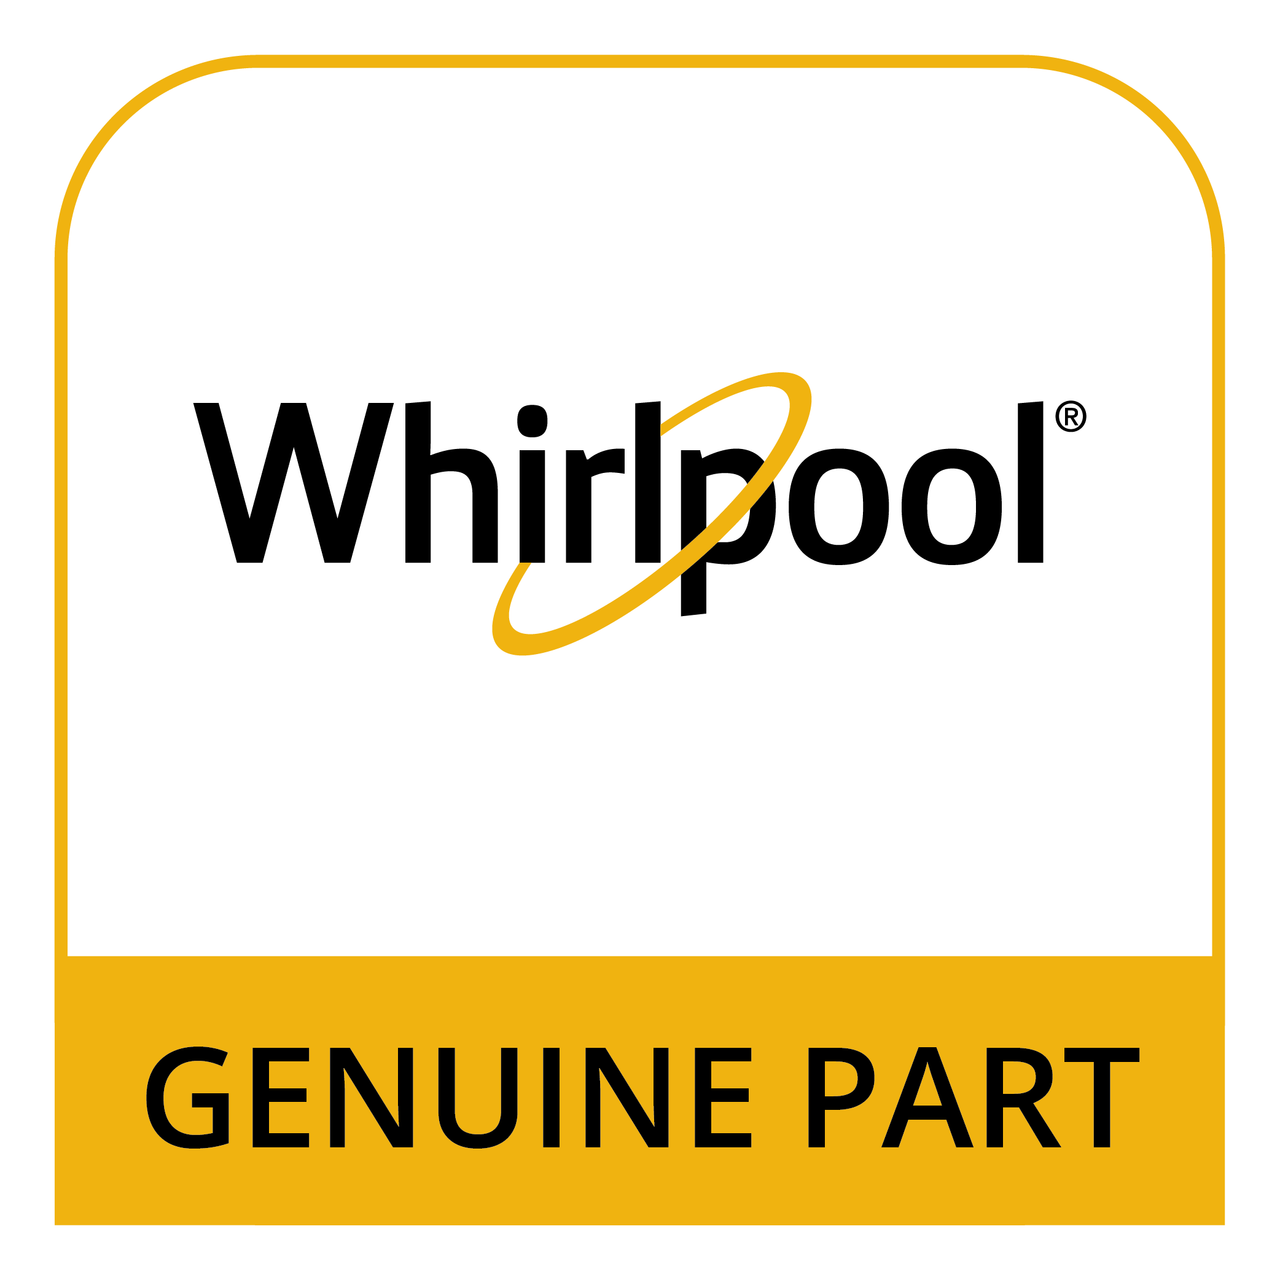 Whirlpool R0131393 - Track, Curtain-Rt Side - Genuine Part